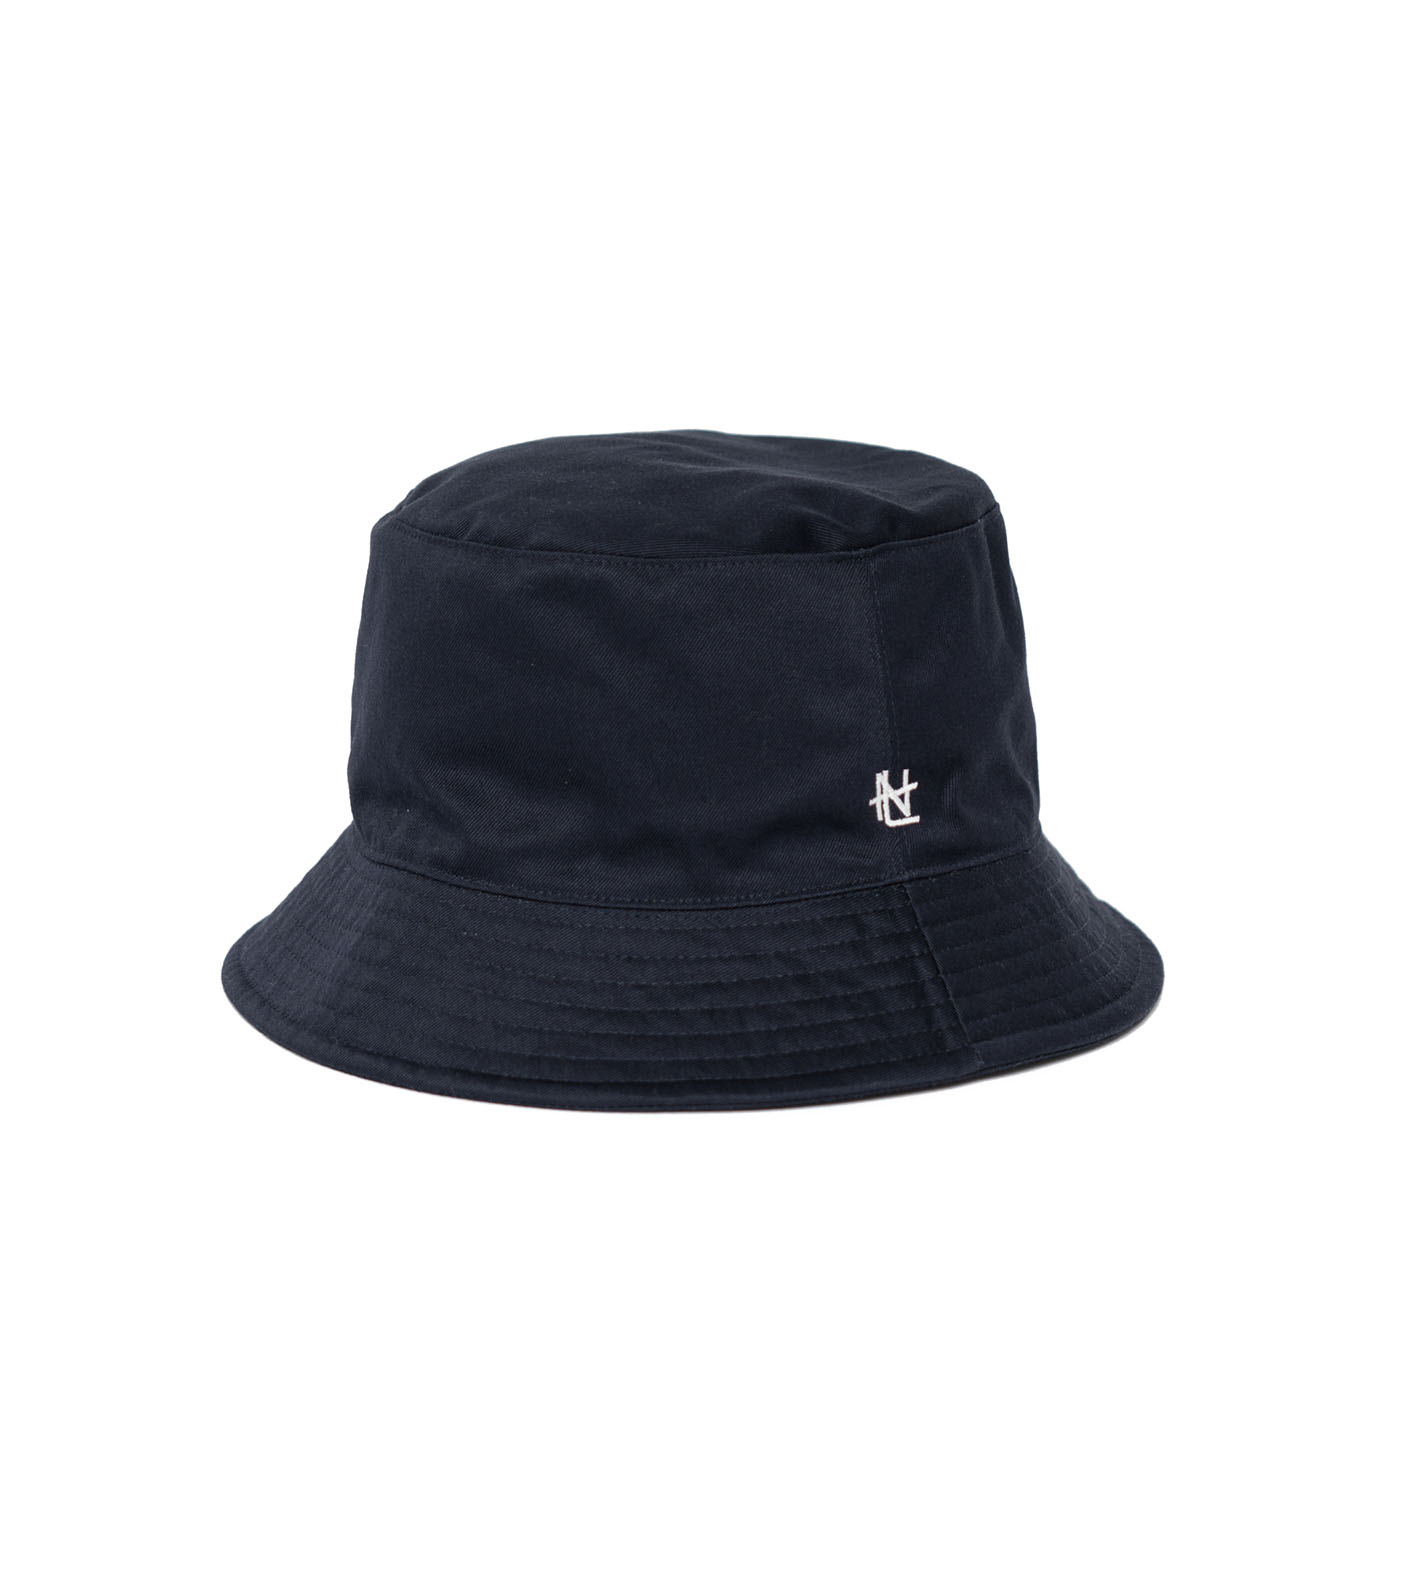 FORME・23SS】BUCKET HAT【ブラック】 - ハット